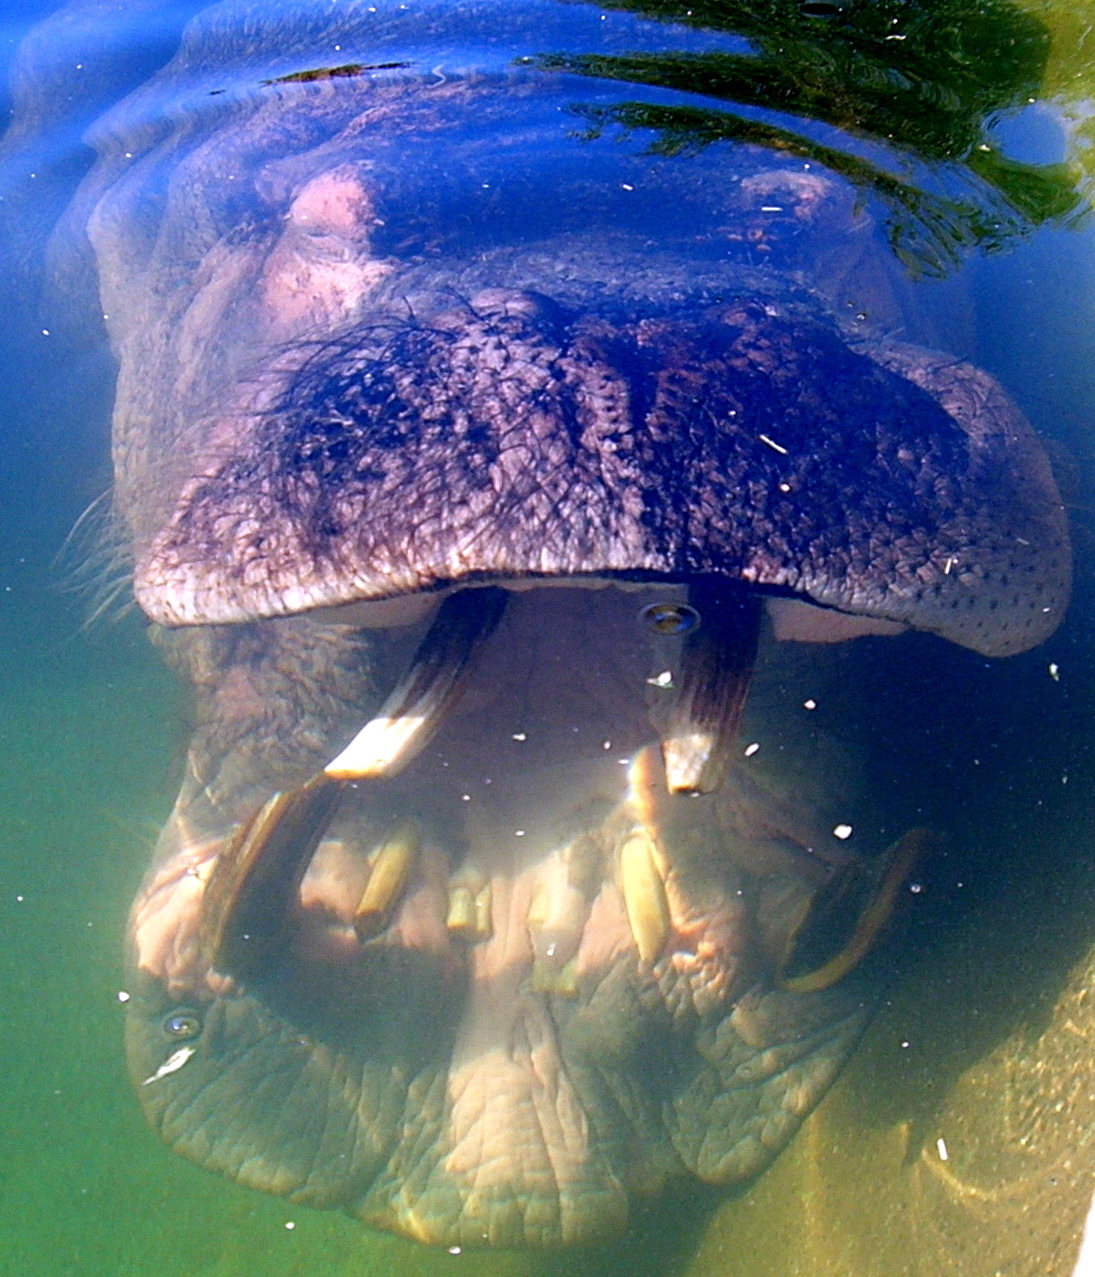 an elephant submerged in a pond with it's trunk up to its mouth